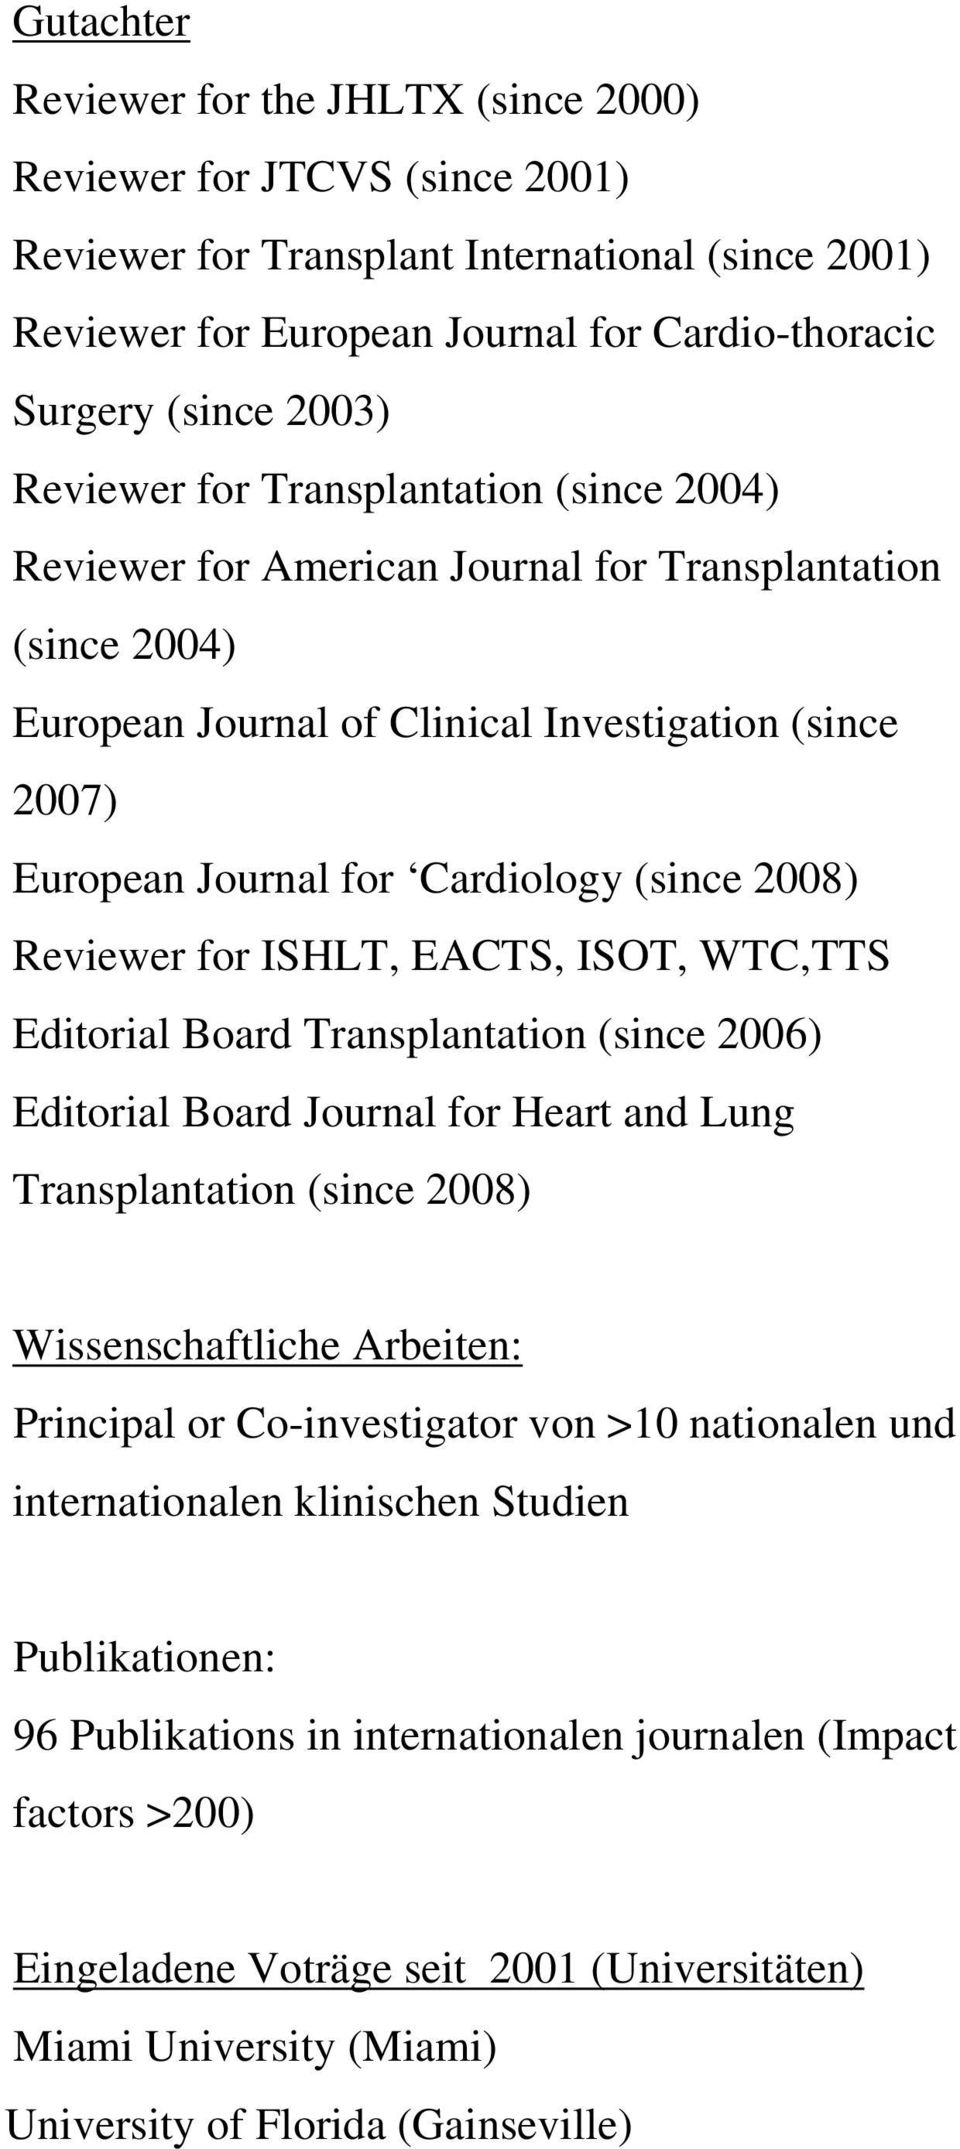 2008) Reviewer for ISHLT, EACTS, ISOT, WTC,TTS Editorial Board Transplantation (since 2006) Editorial Board Journal for Heart and Lung Transplantation (since 2008) Wissenschaftliche Arbeiten: